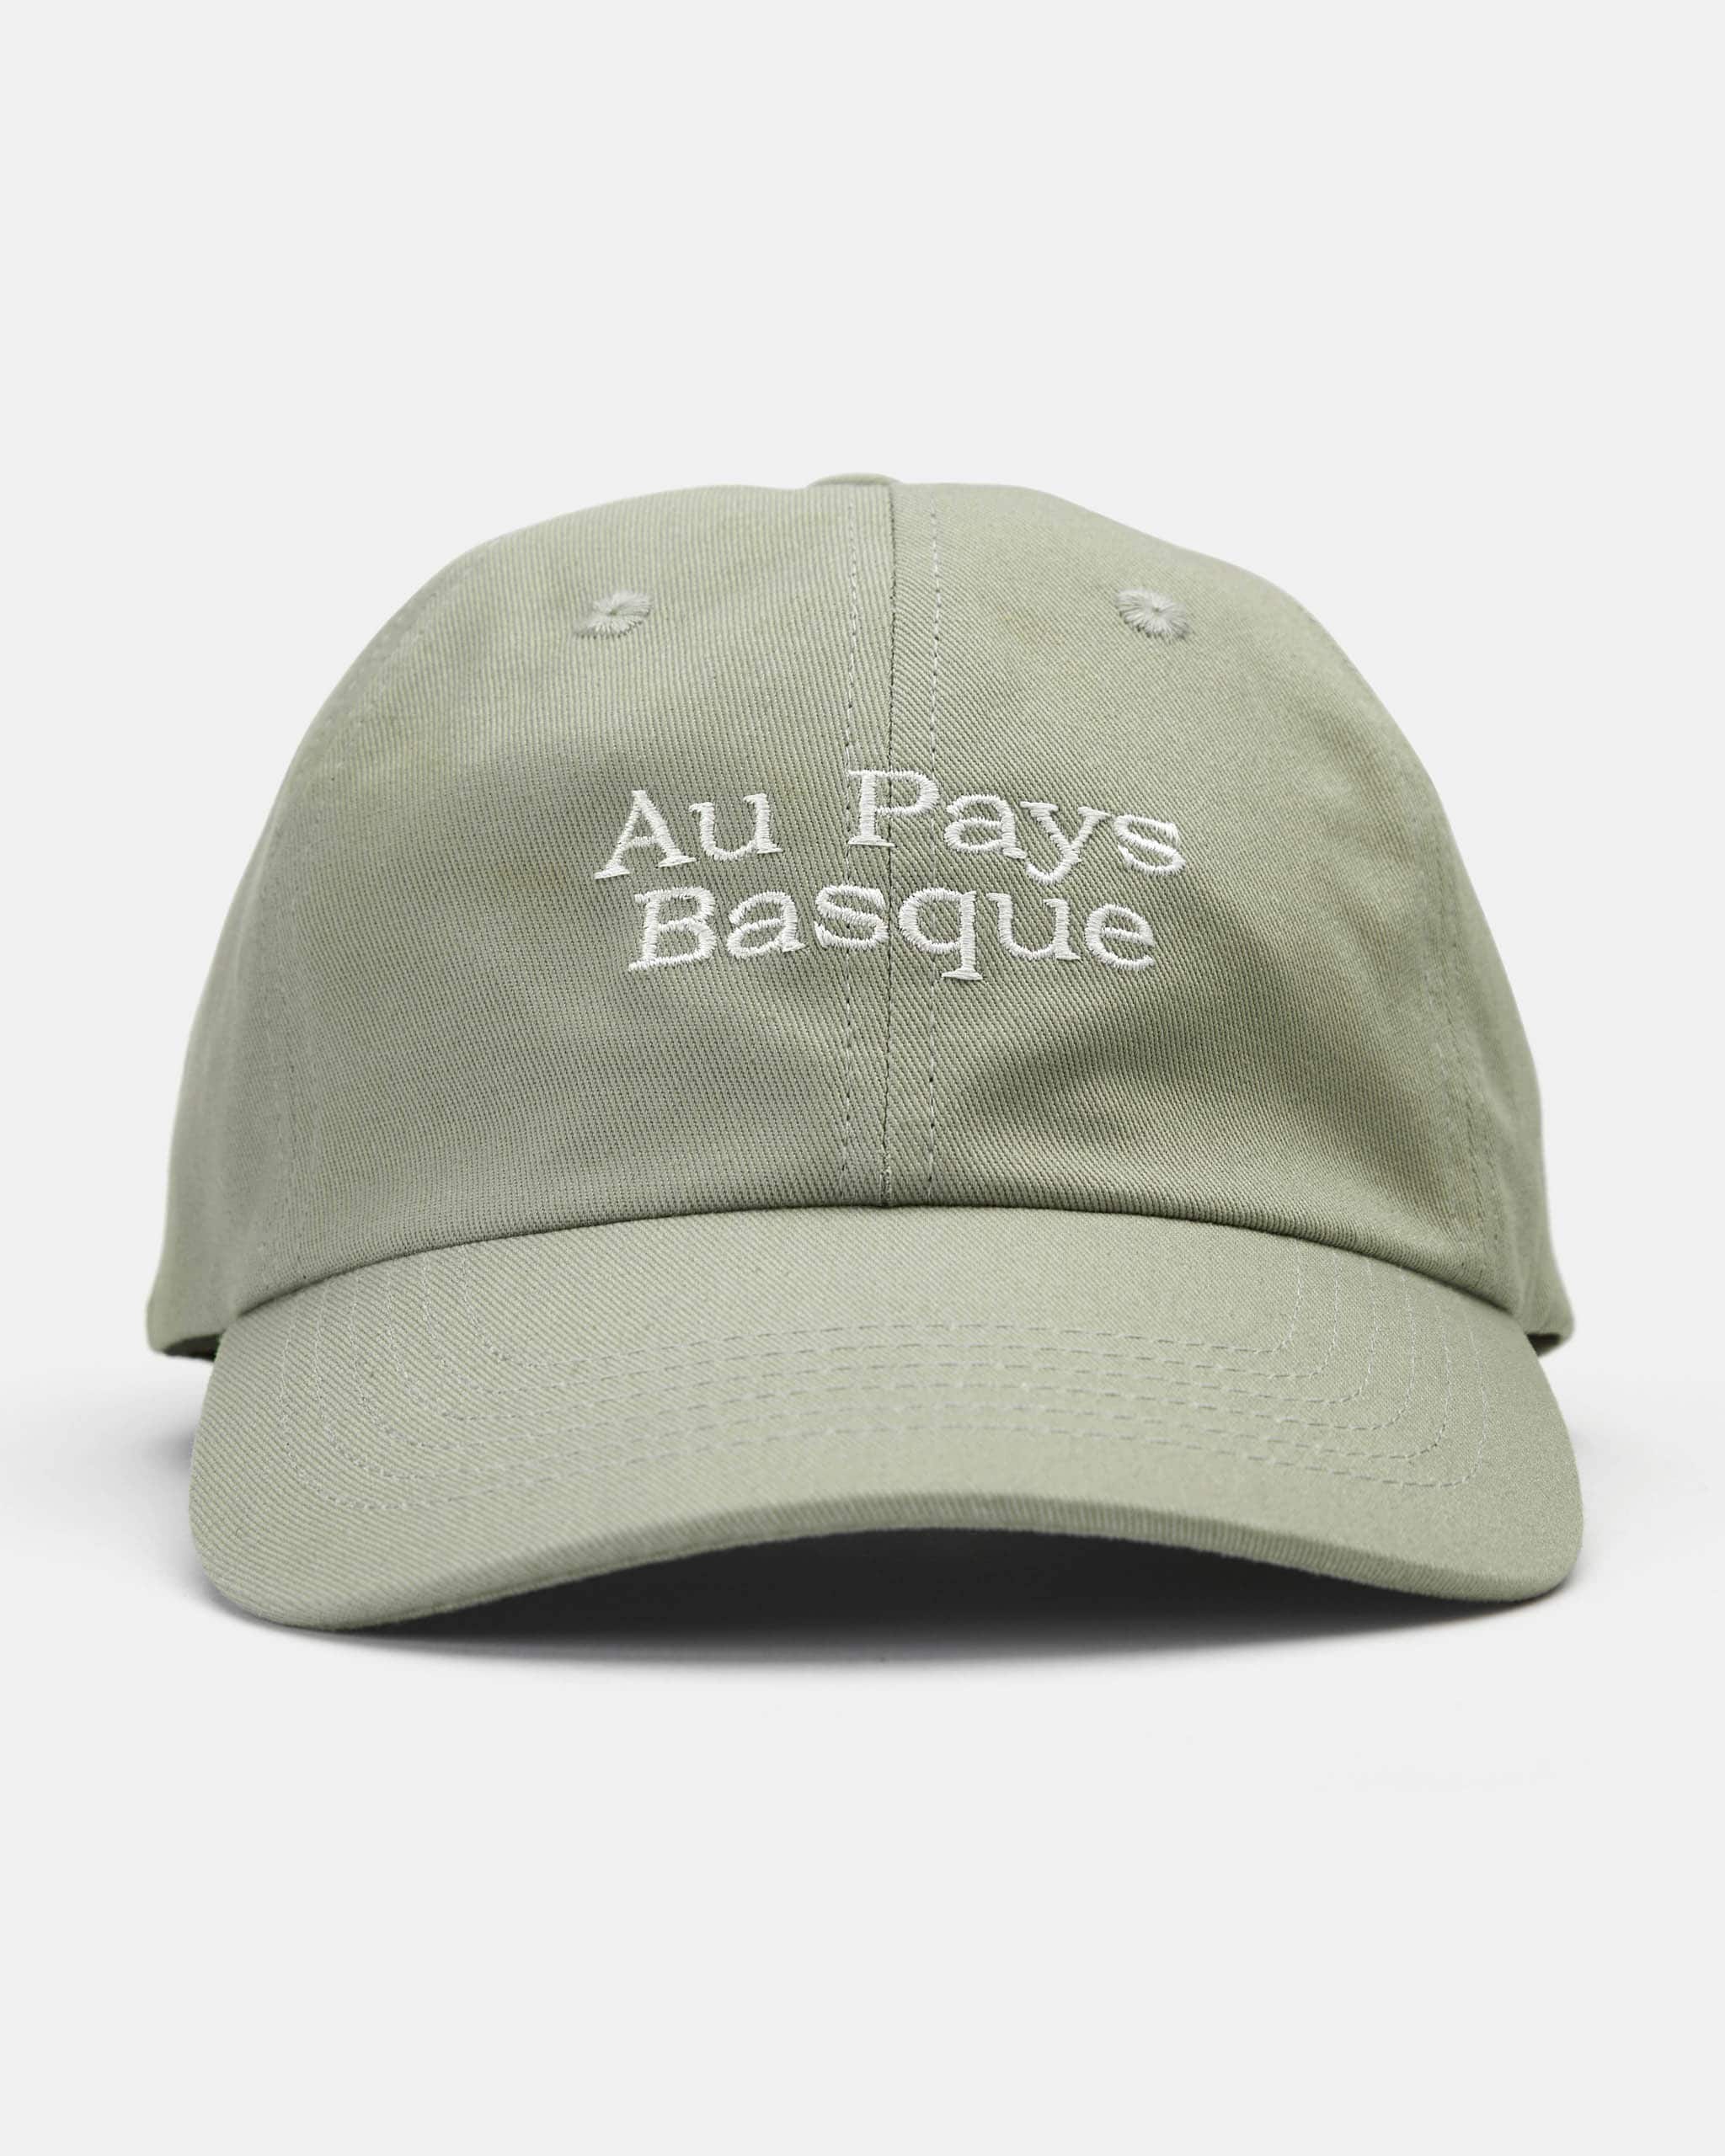 Limited edition Travelogue cap Biarritz green image 1